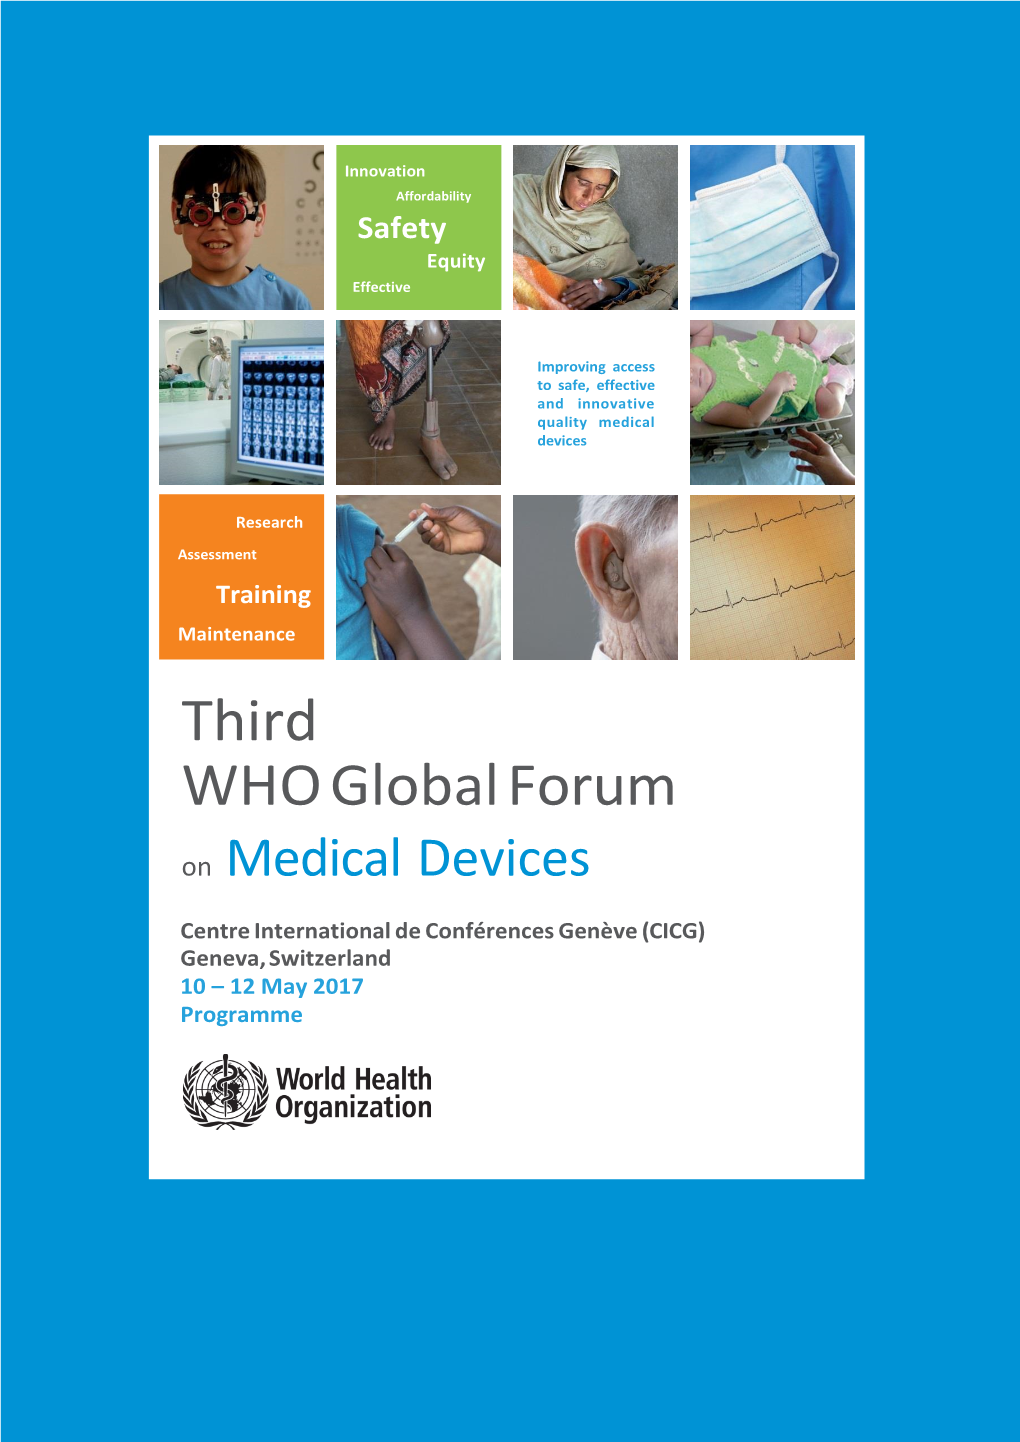 Third WHO Global Forum on Medical Devices